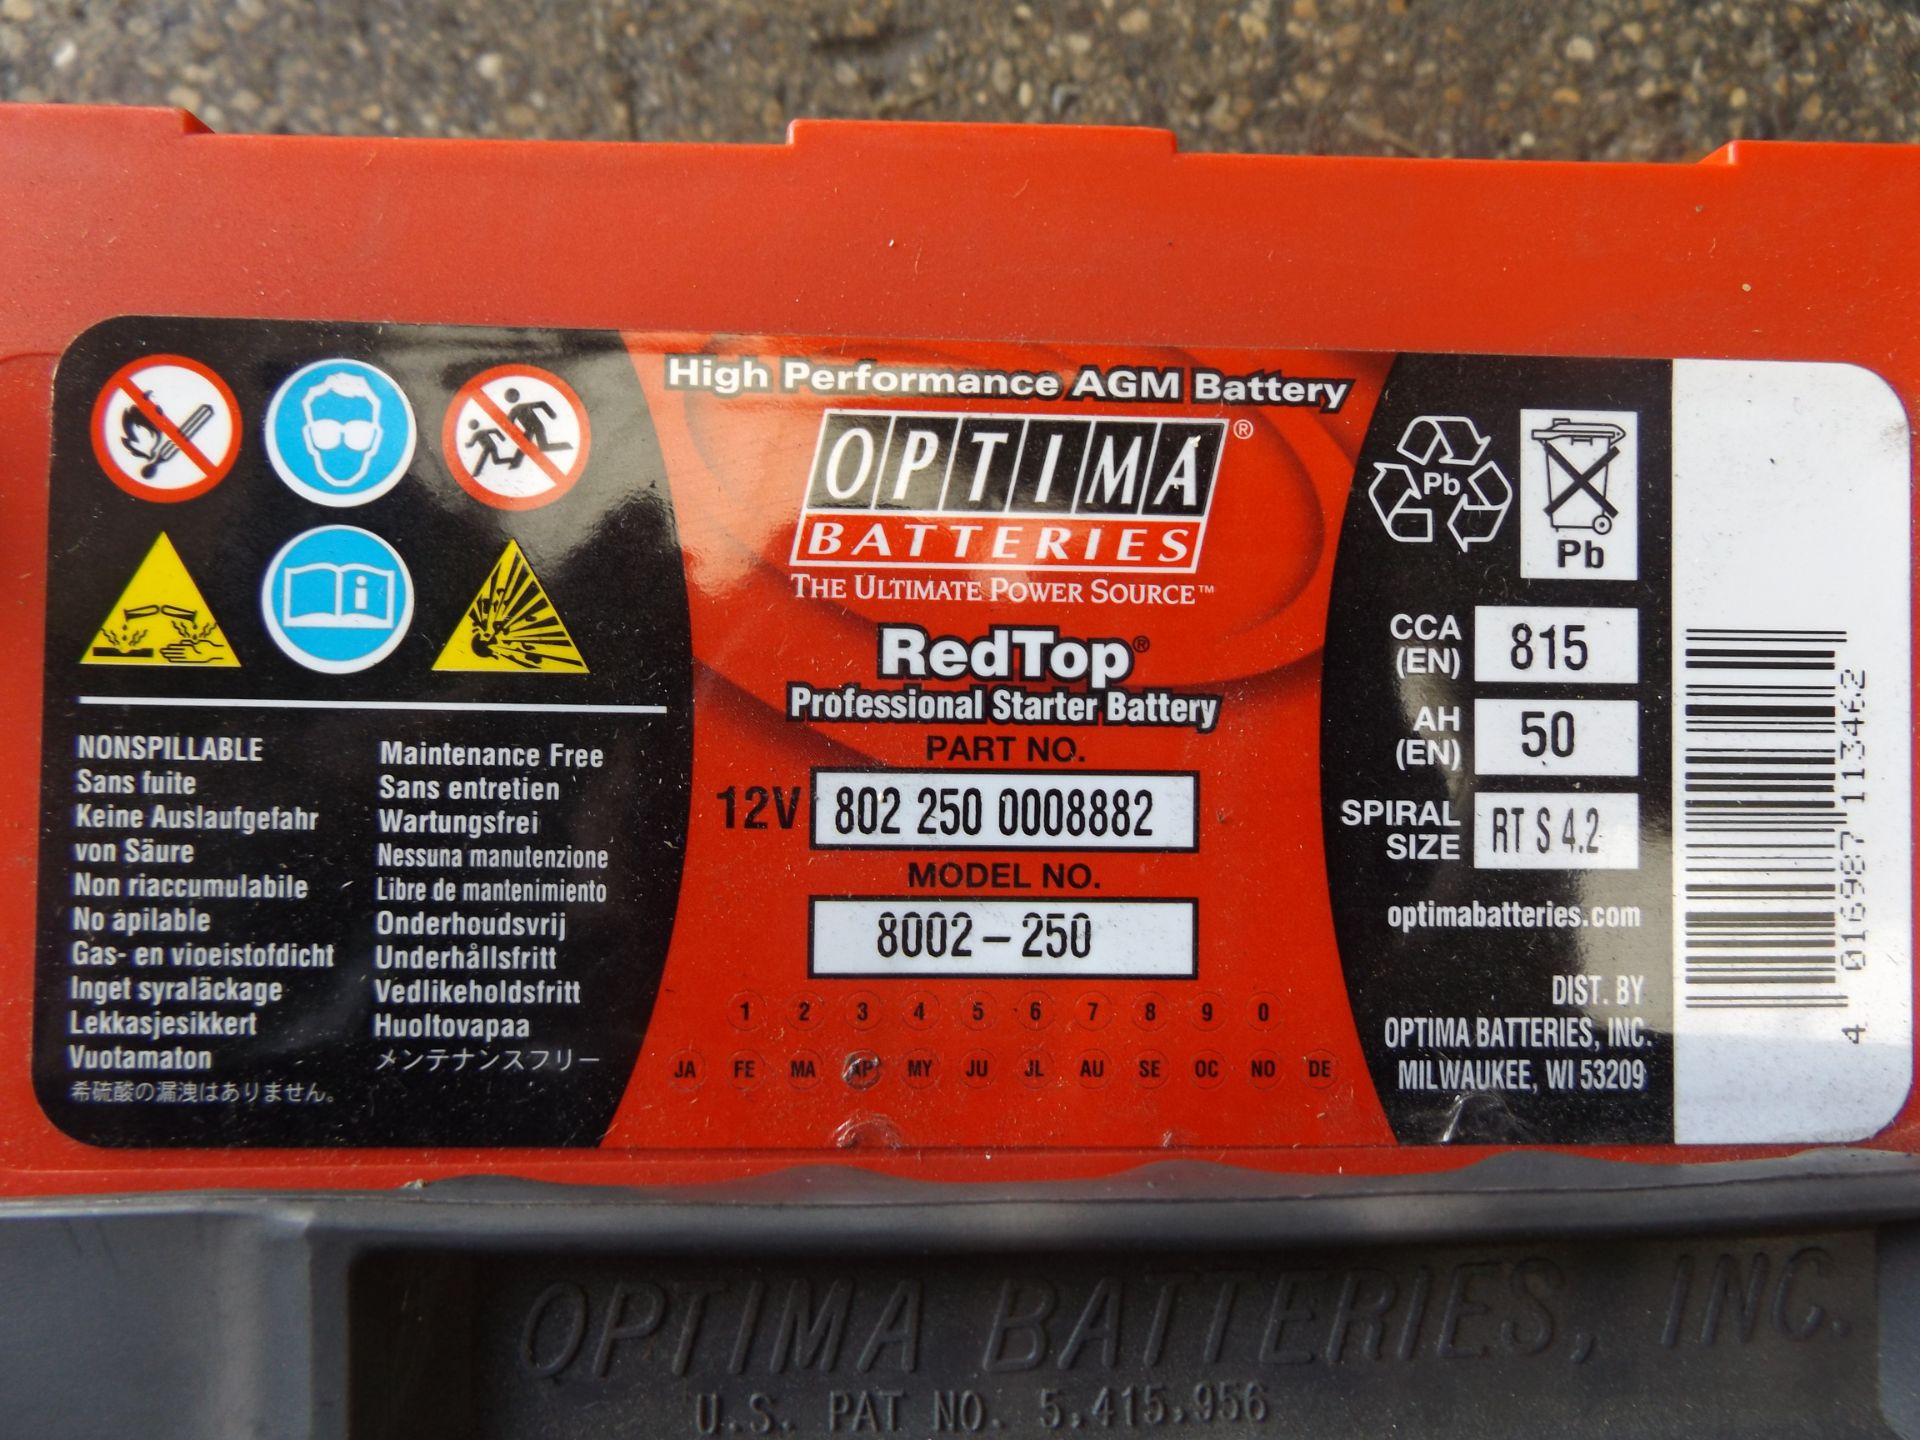 Optima Red Top RTS 4.2 (8002-250) 12V-50Ah Battery - Image 3 of 5